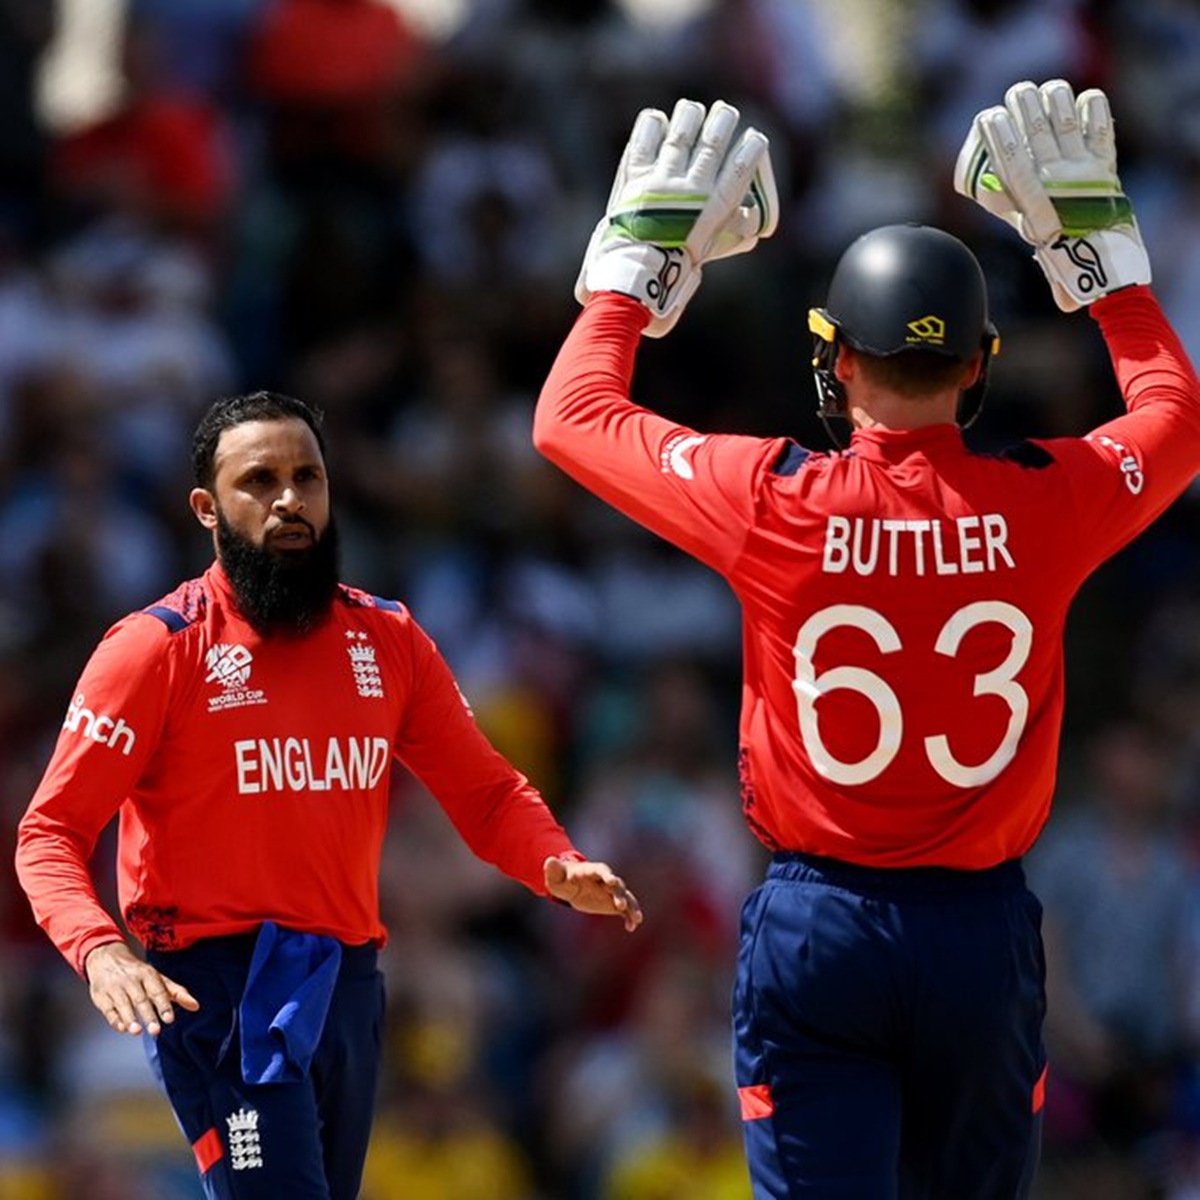 England spinner Rashid was celebrates with Jos Buttler after dismissing Oman's Kaleemullah during the T20 World Cup Group C match in Antigua on Friday.